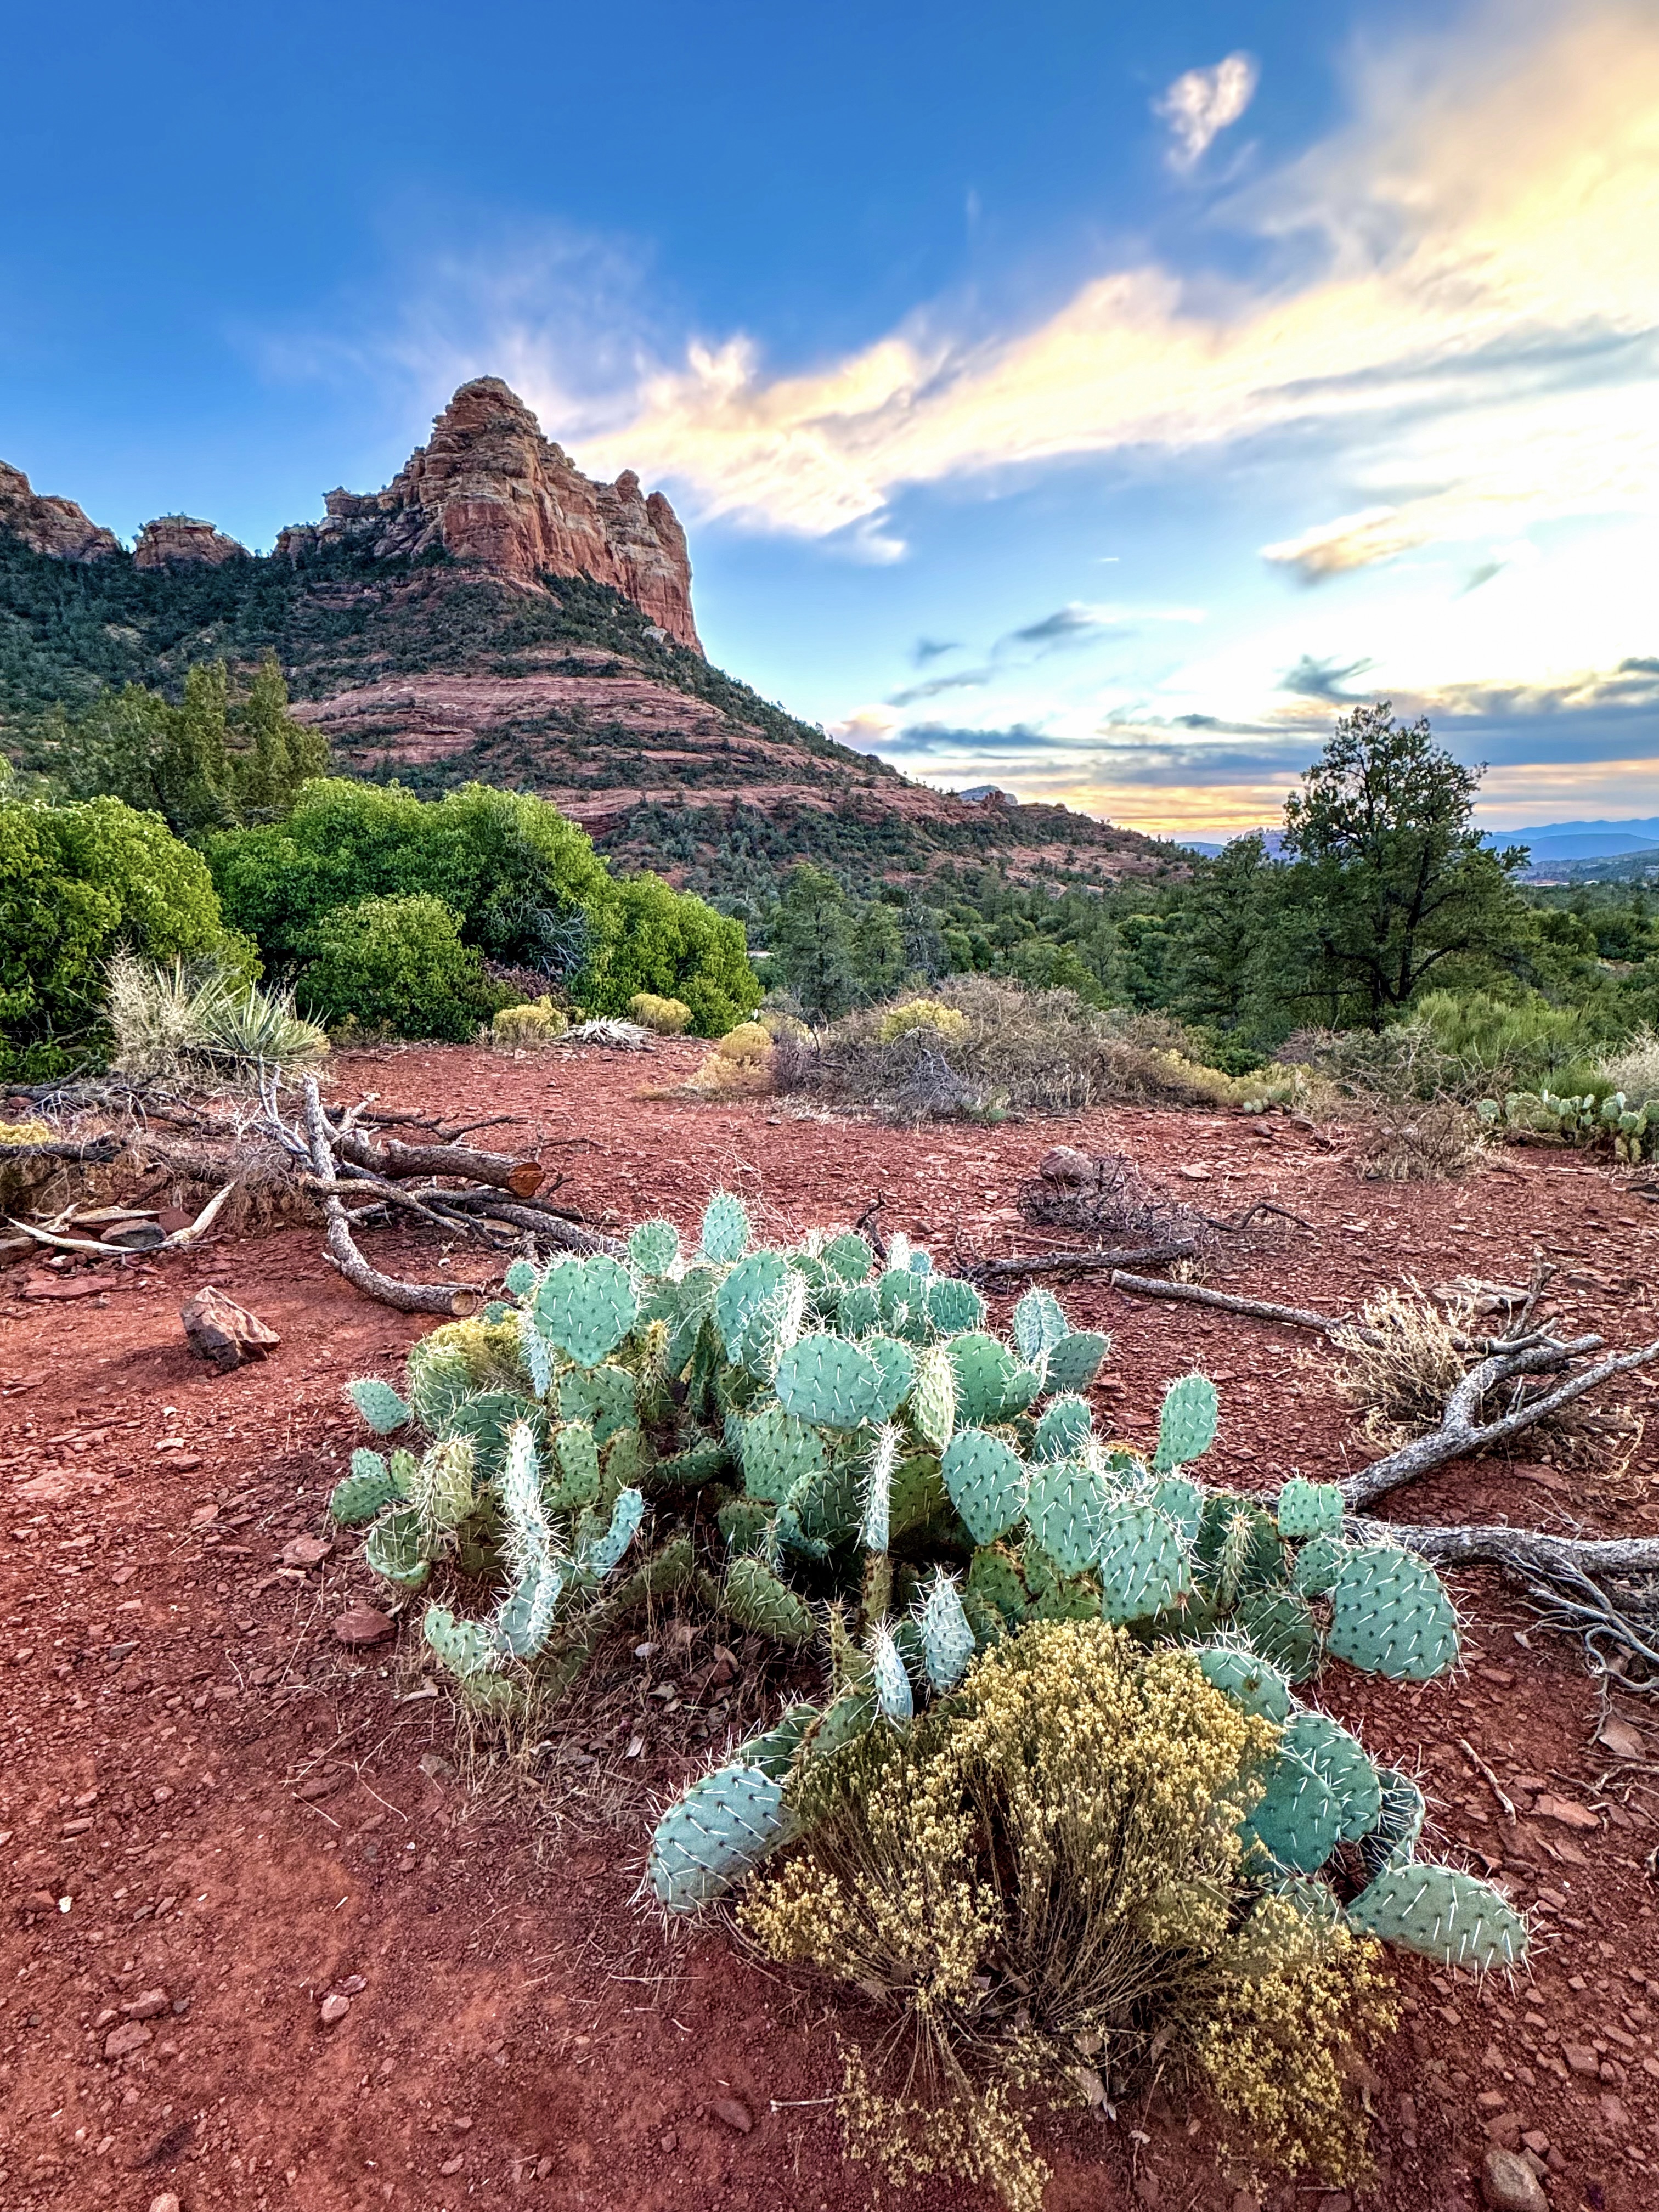 Photo by Lisa Renee Ludlum  |  The best kept secret location in Sedona for the painted sky glorious sunsets viewed from the amazing vast Schnebly Hill 